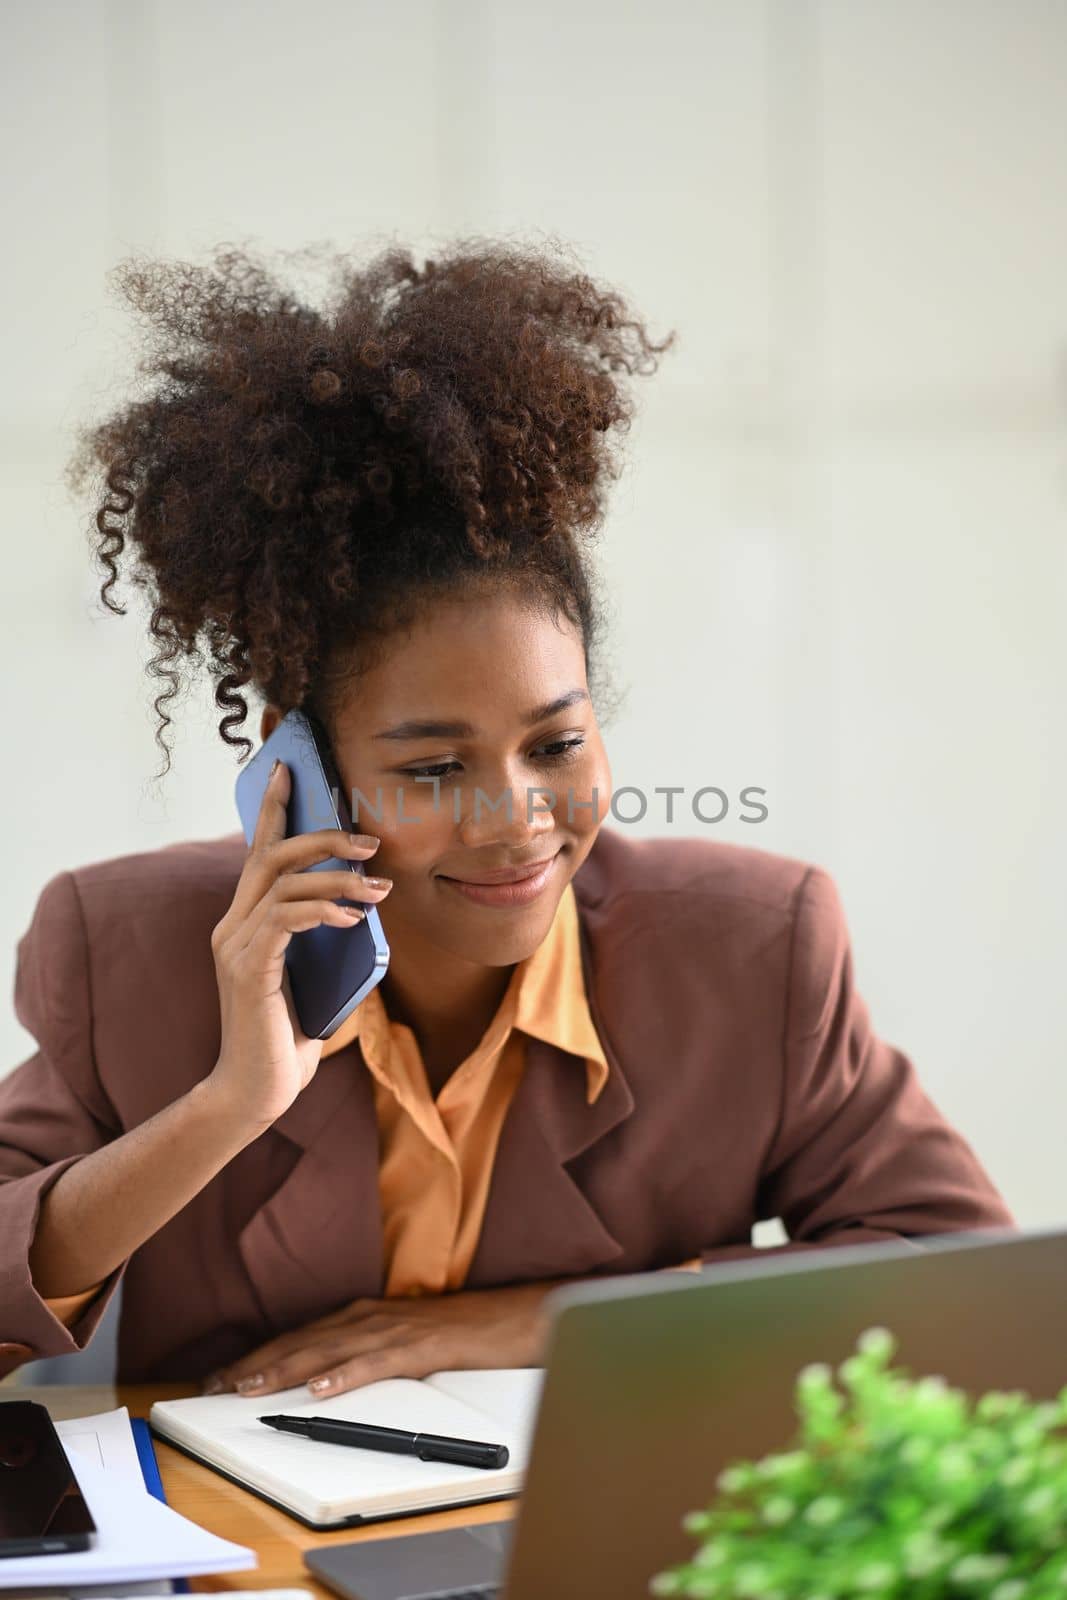 Smiling African American businesswoman in stylish suit having pleasant conversation while sitting at workstation.